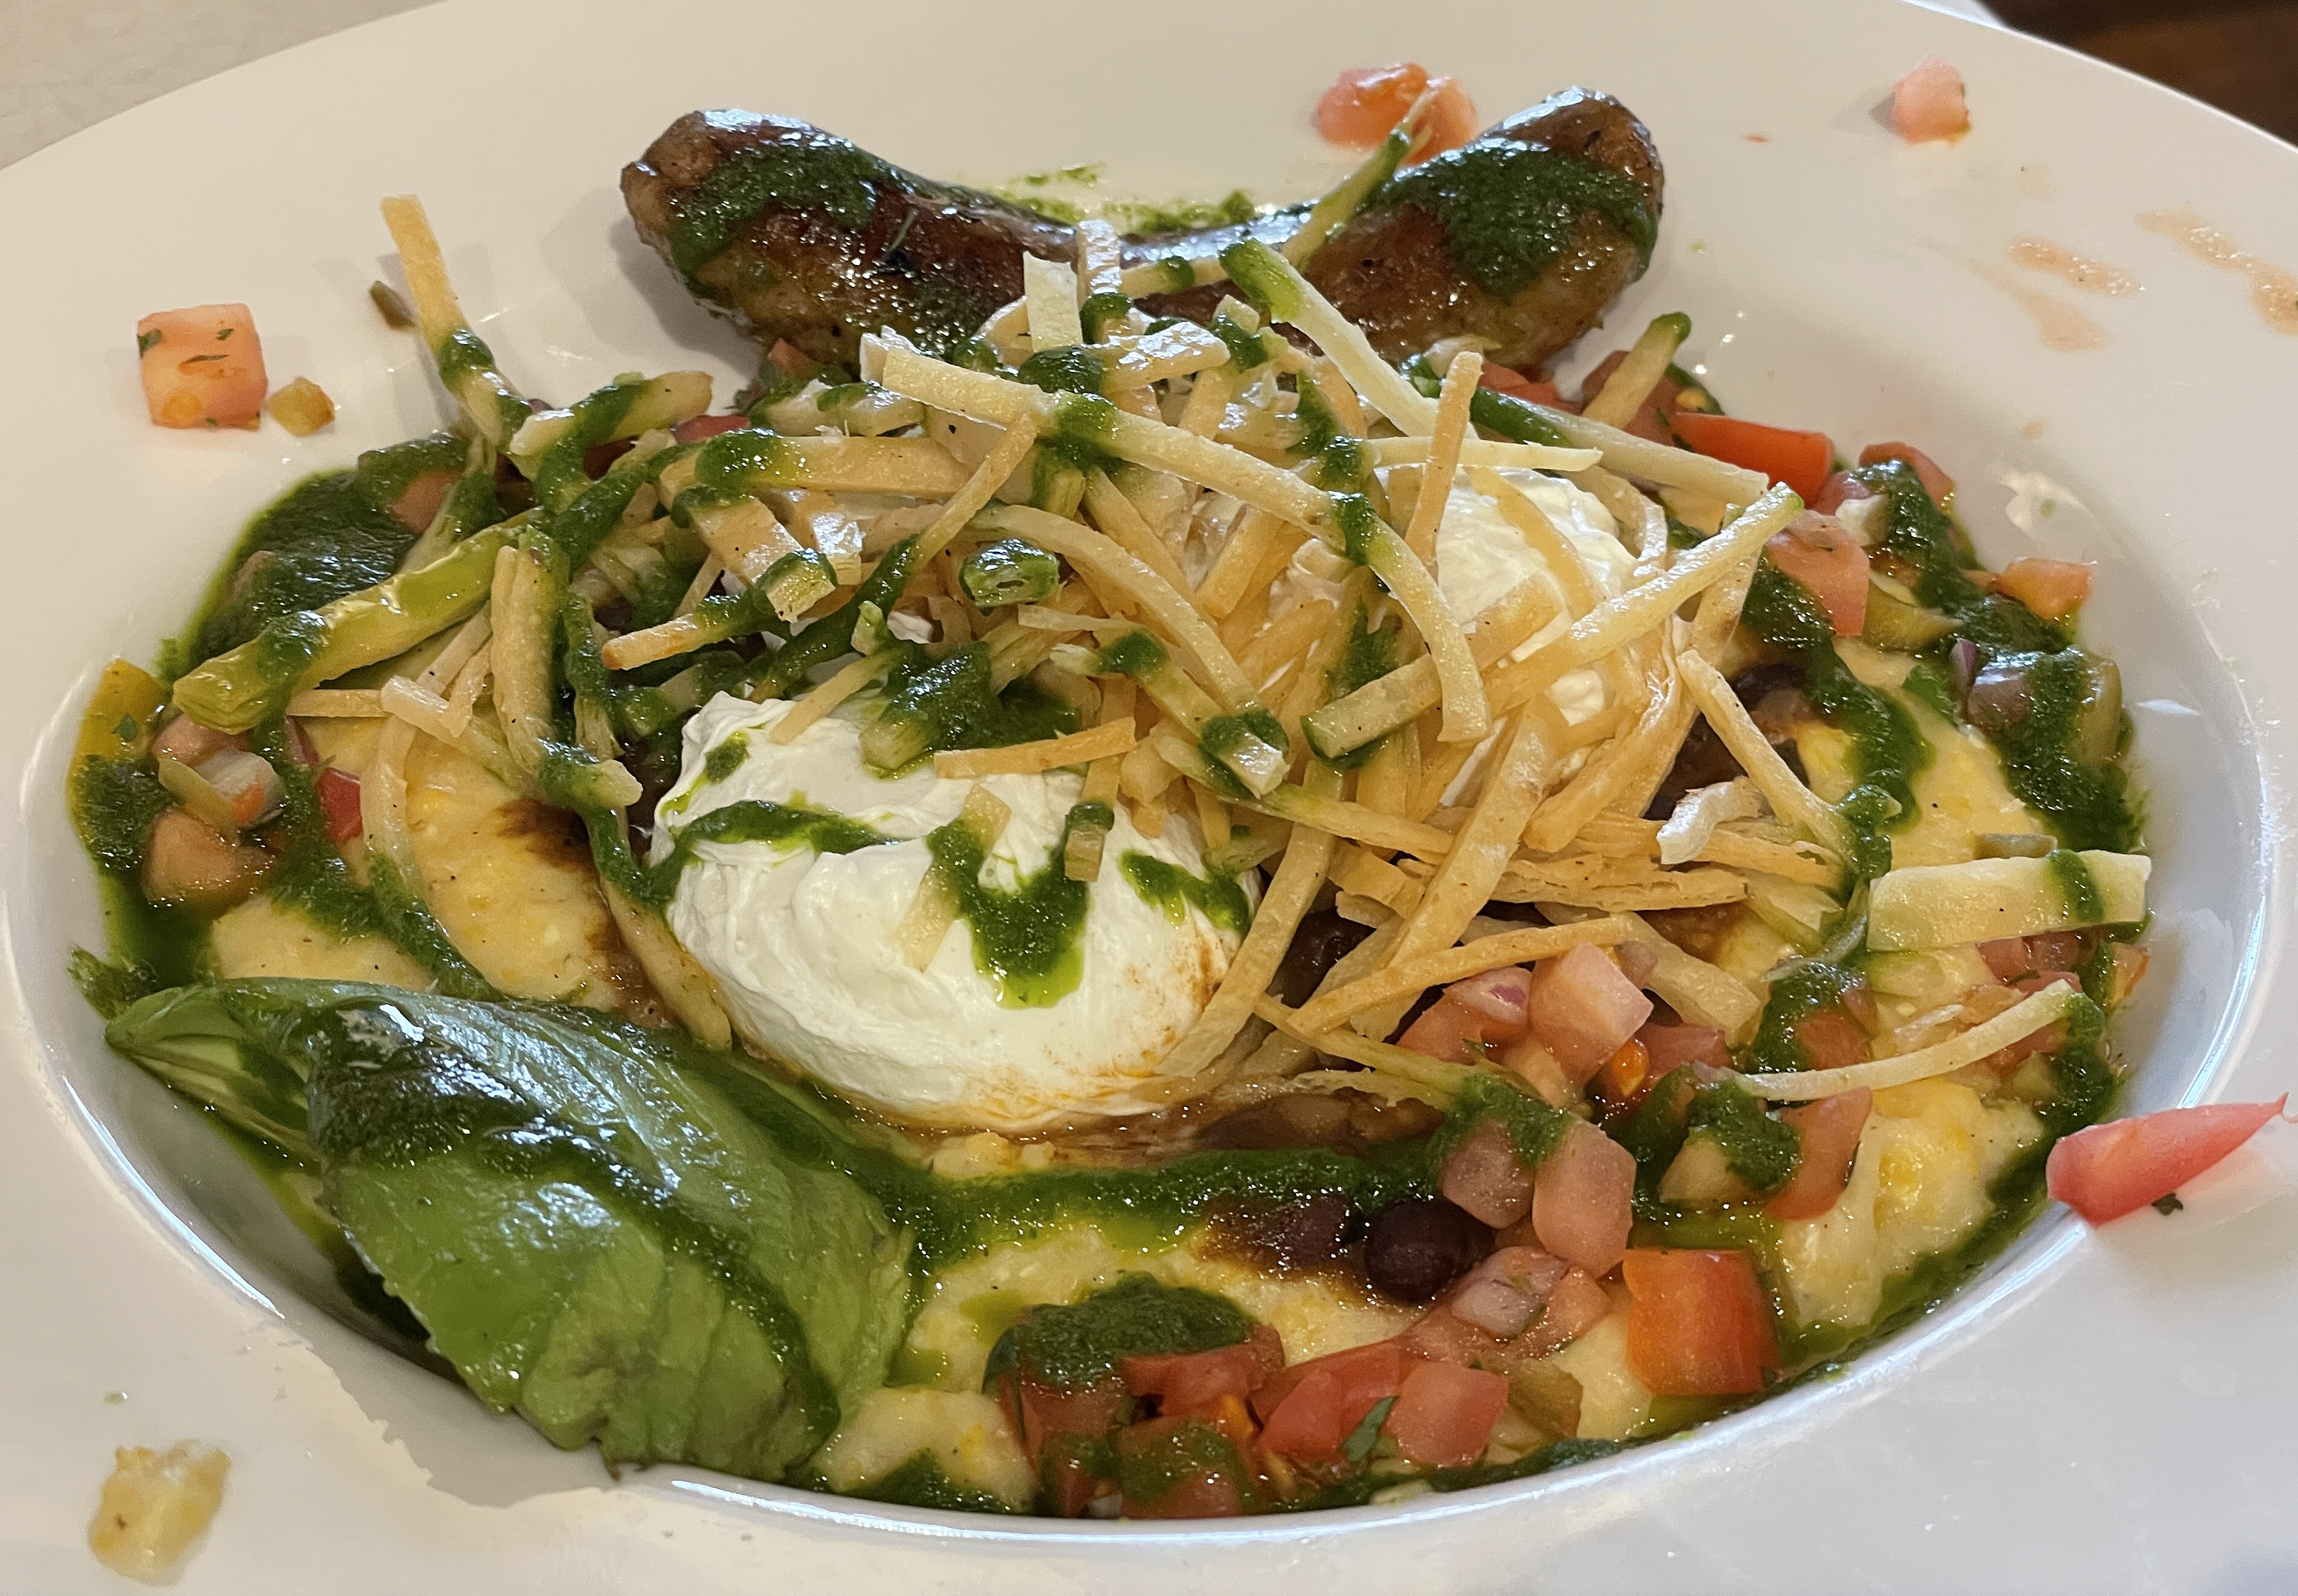 The huevos rancheros grit bowl brings South of the Border flavors to the table with pico de gallo, black beans and tortillas to accompany poached eggs and cheese grits.